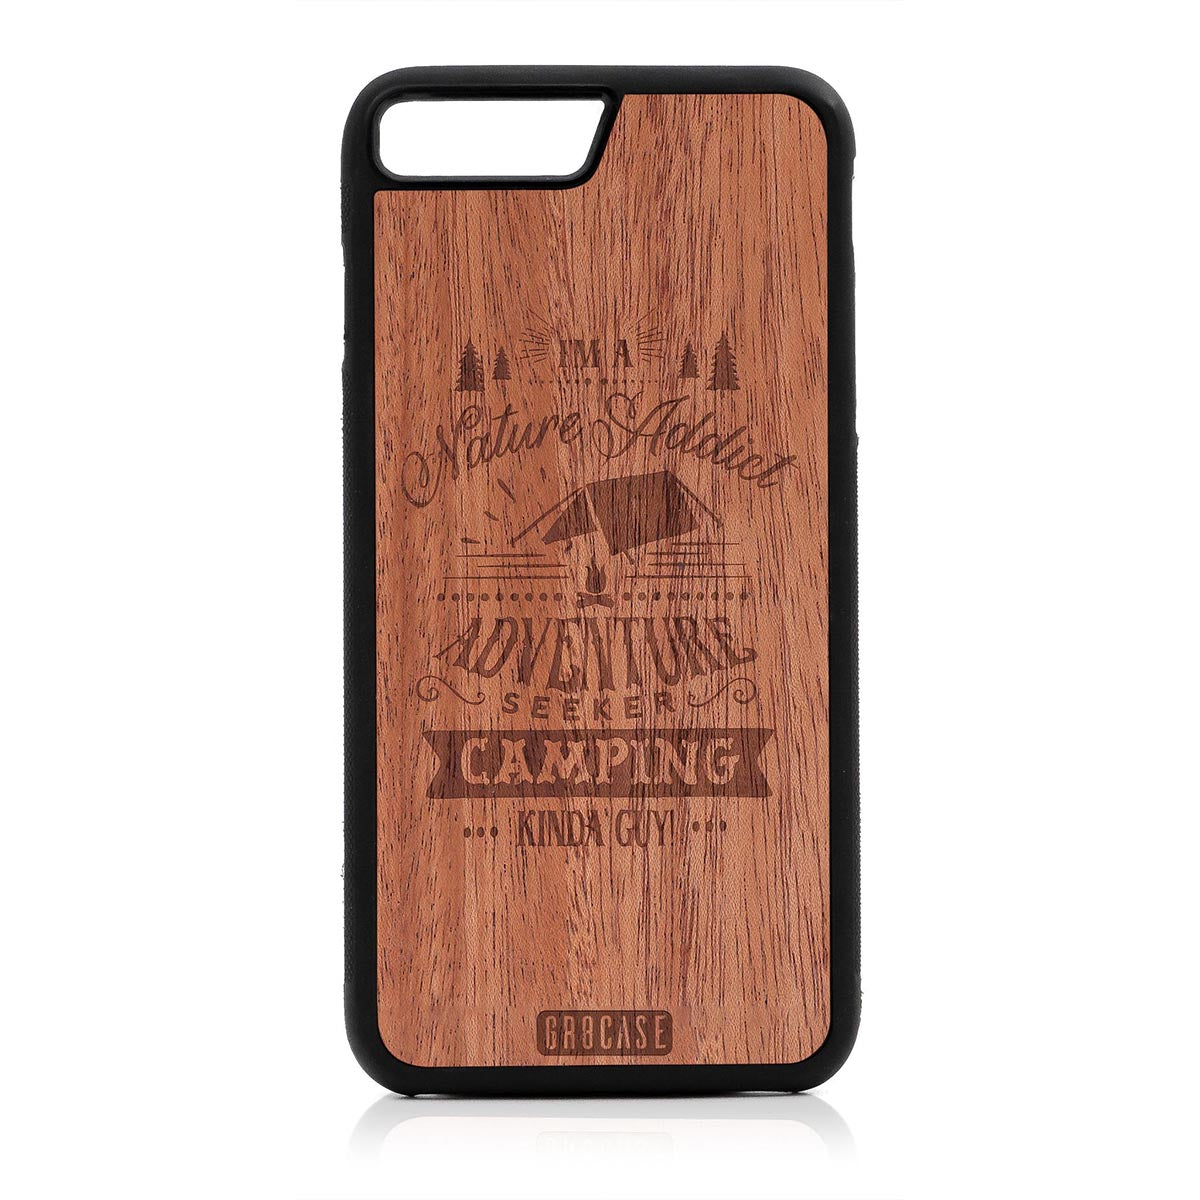 I'm A Nature Addict Adventure Seeker Camping Kinda Guy Design Wood Case For iPhone 7 Plus / 8 Plus by GR8CASE